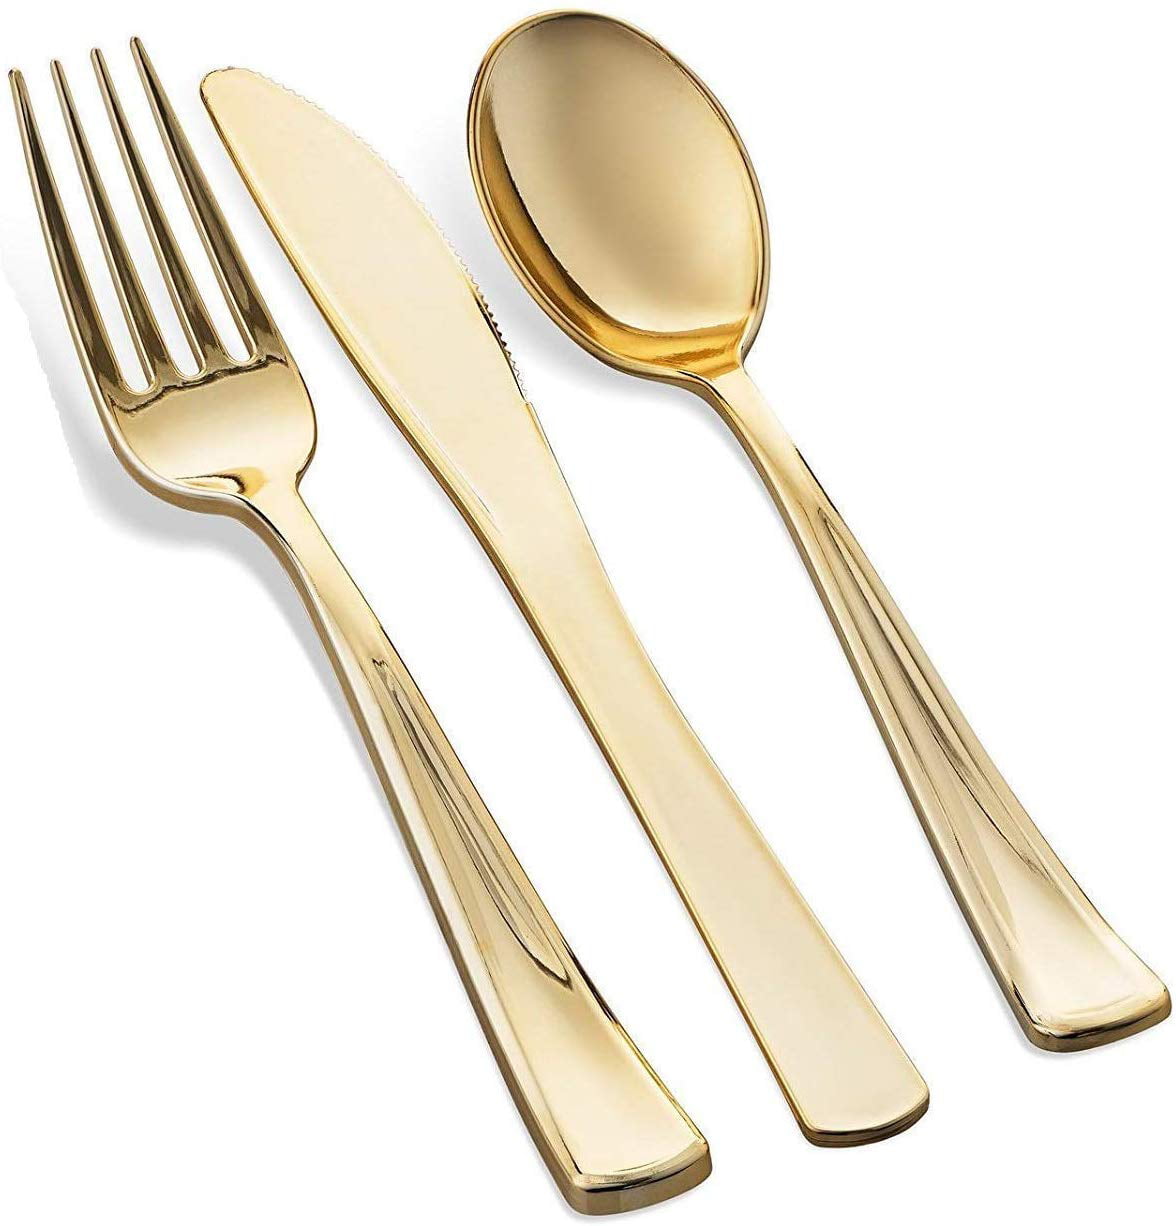 Cutlery Birthday & Christmas| 180 Pcs Fancy Gold Silverware Cups & Paper Straws for Dinner Bridal Shower Includes Gold Rim Plates Napkins Disposable Gold Dinnerware Set for Party or Wedding 